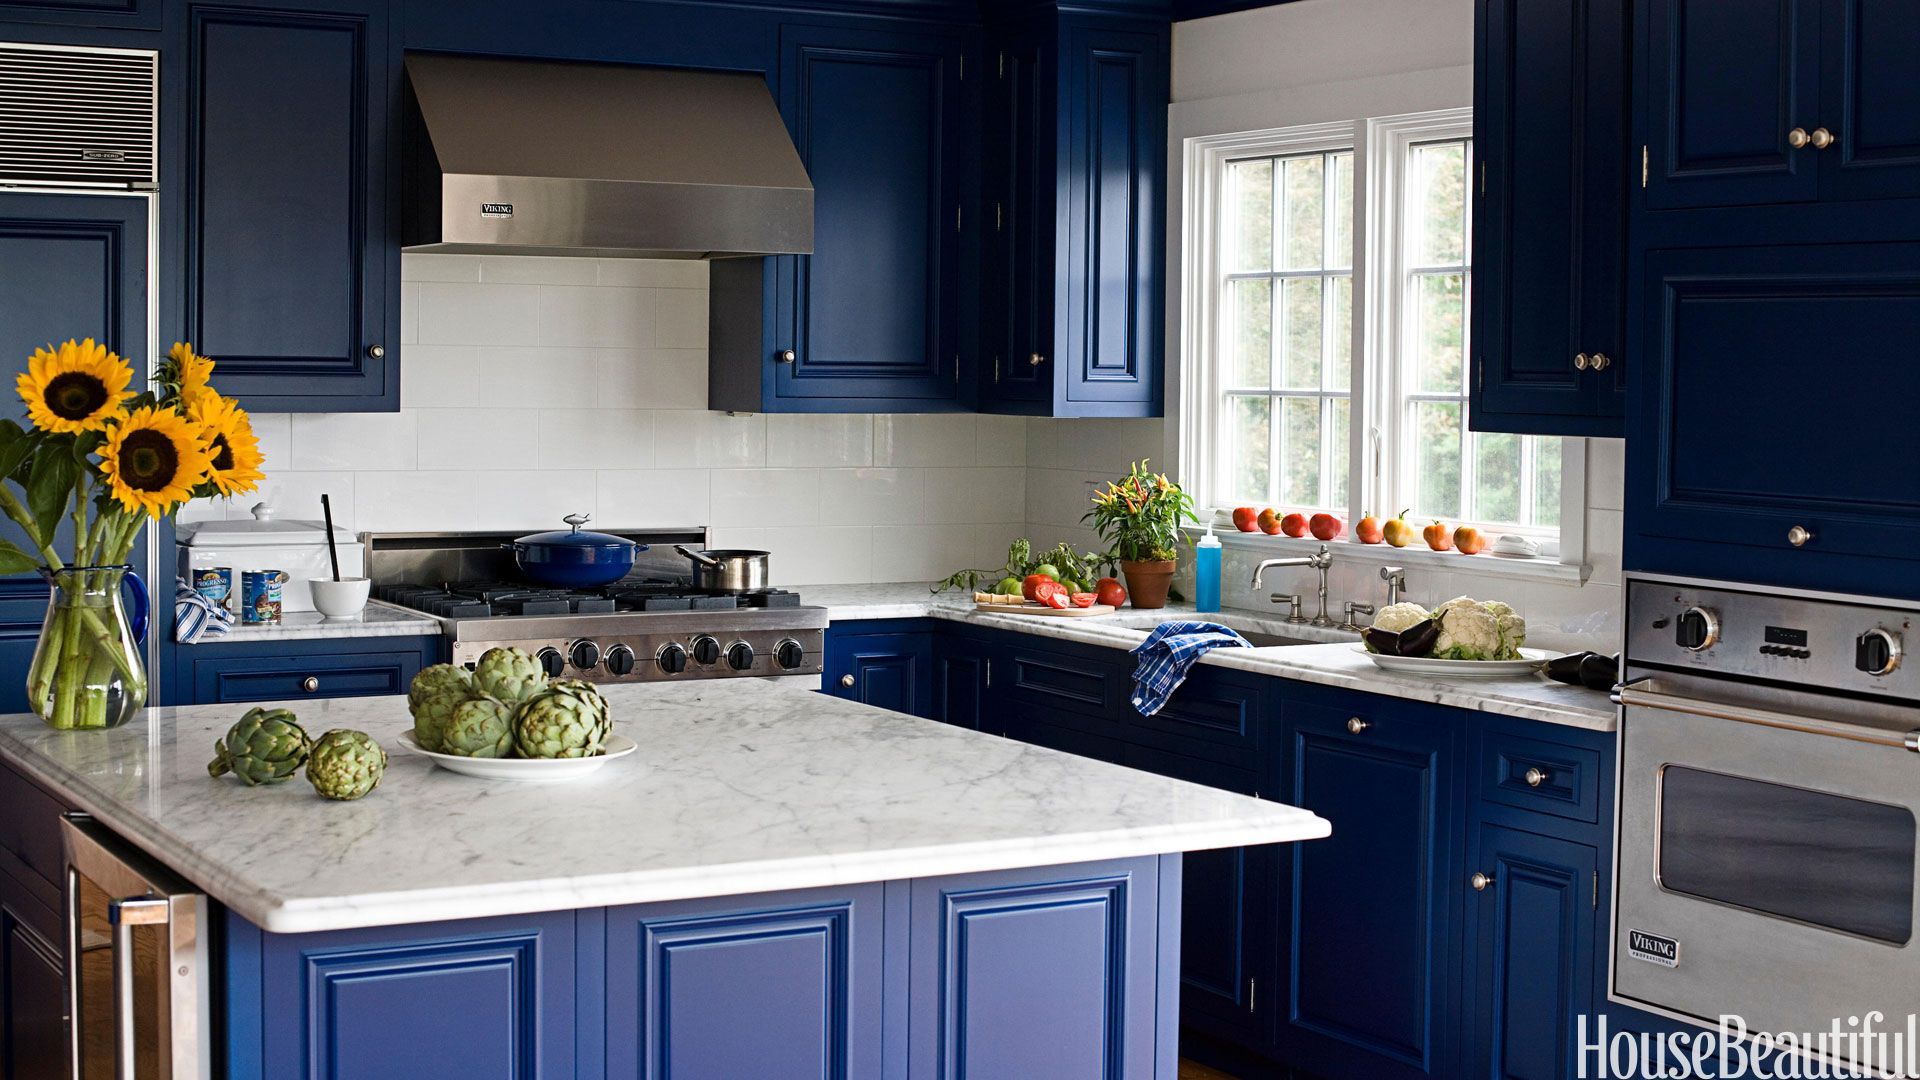 House Beautiful shows us how color can add interest and style.